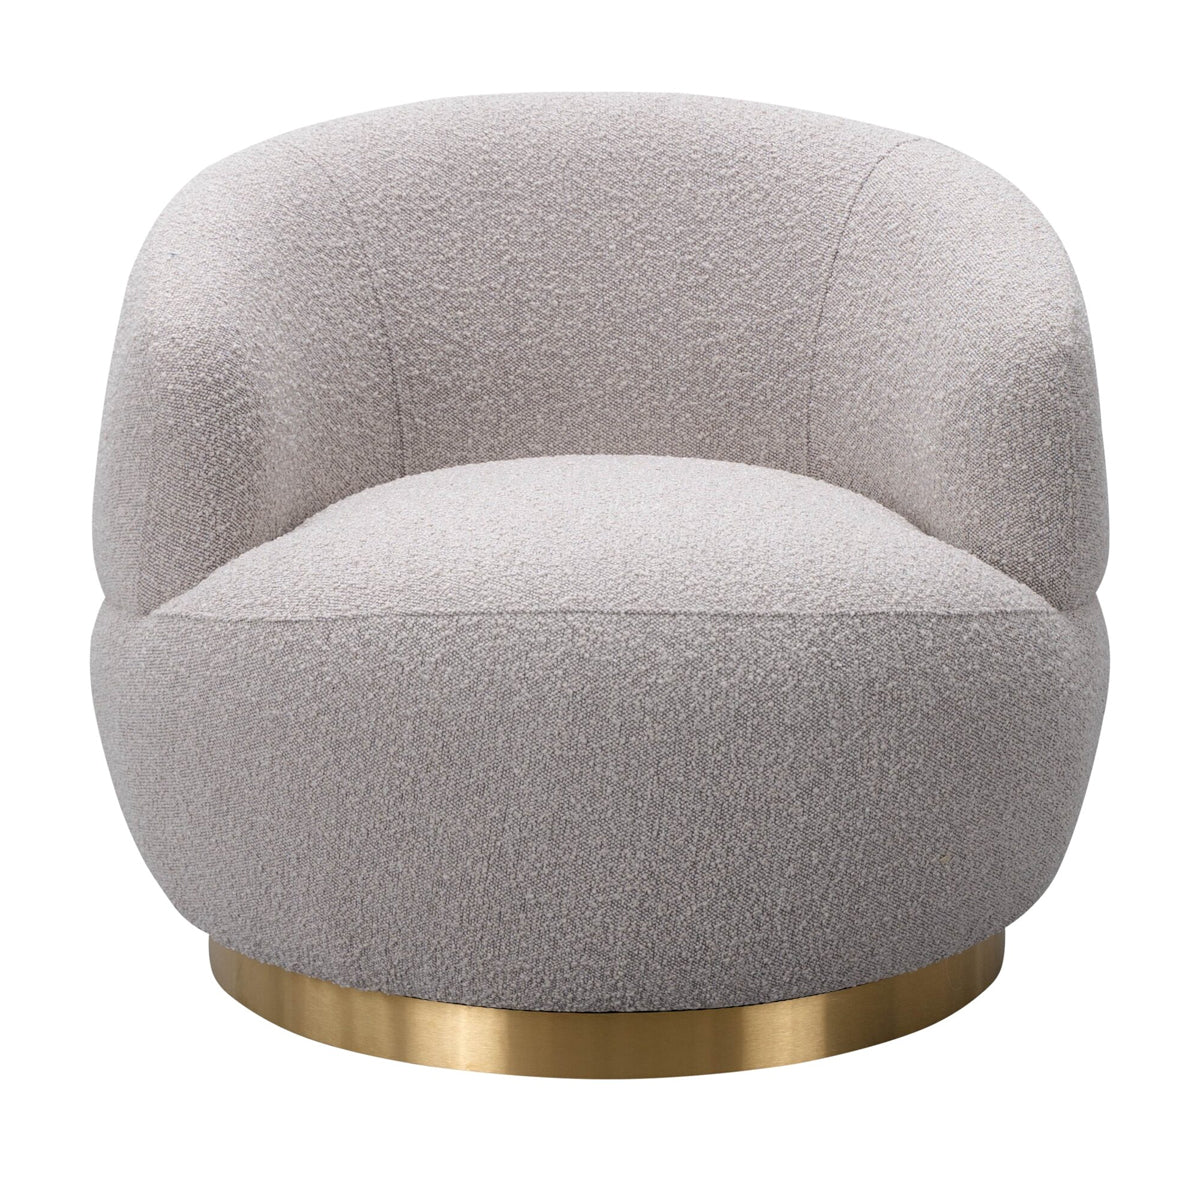 Liang & Eimil Vitale Chair in Taupe Boucle with Brushed Brass